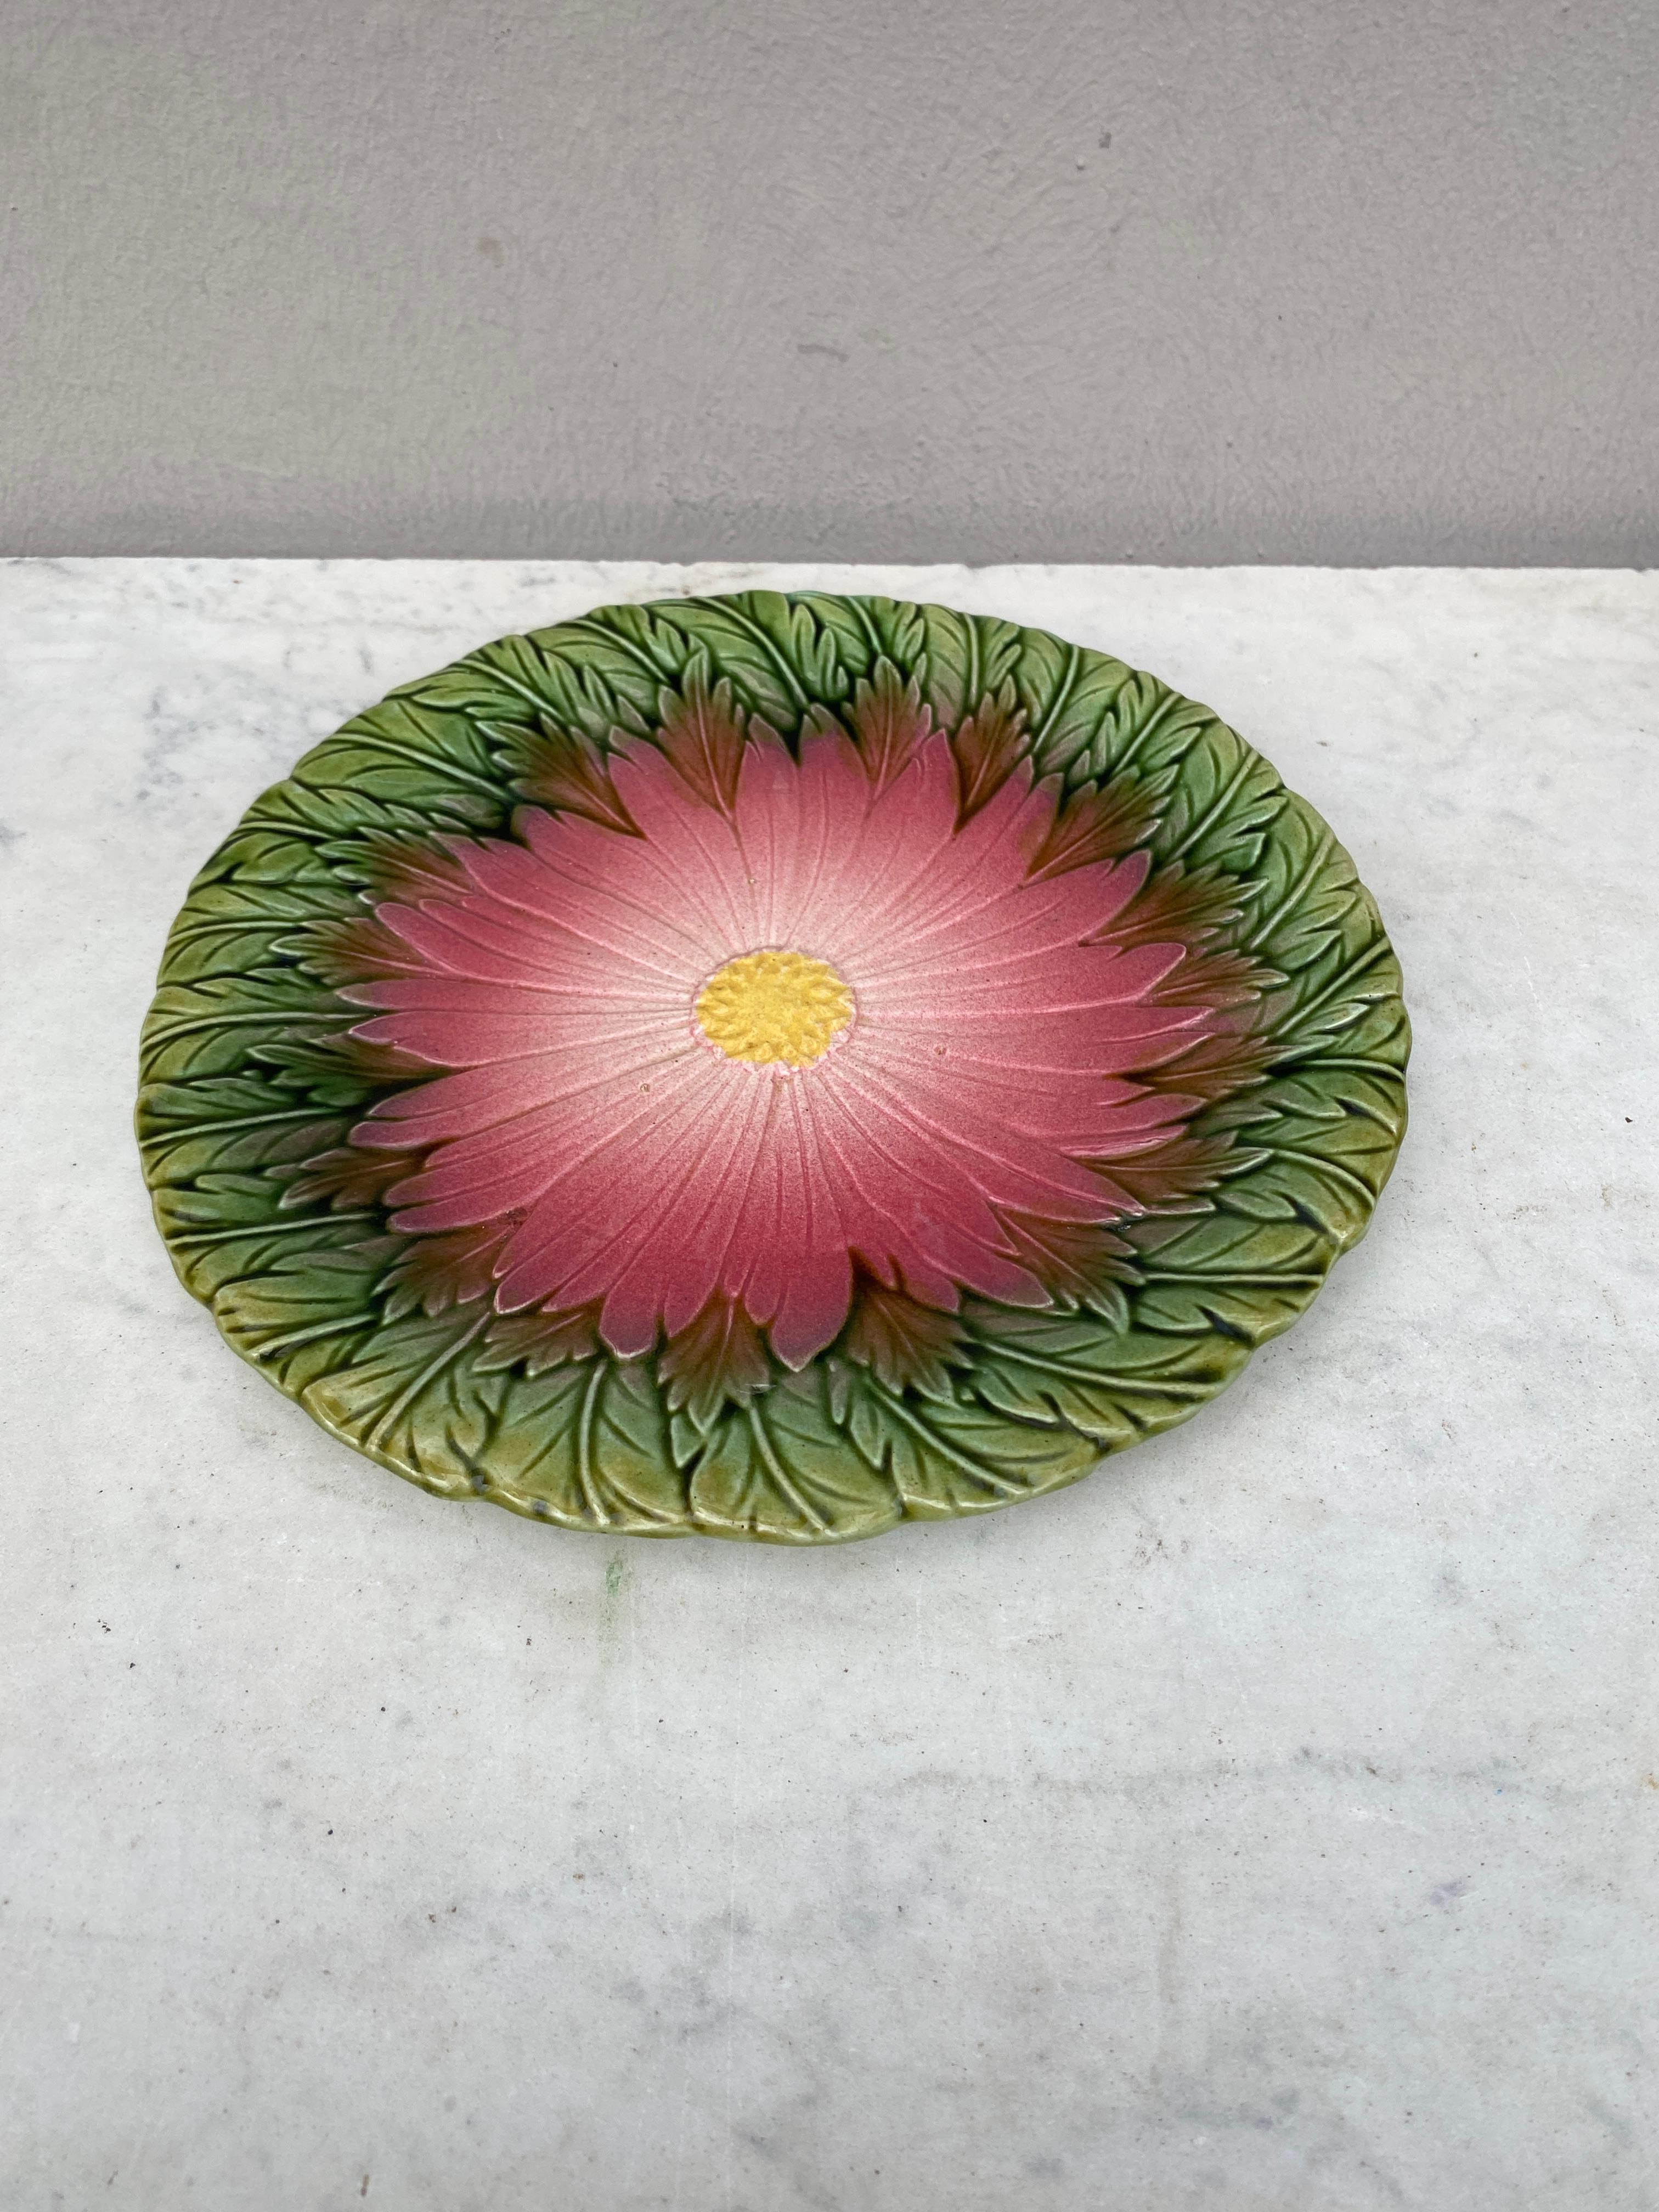 French Majolica daisy plate Orchies unsigned, circa 1890.